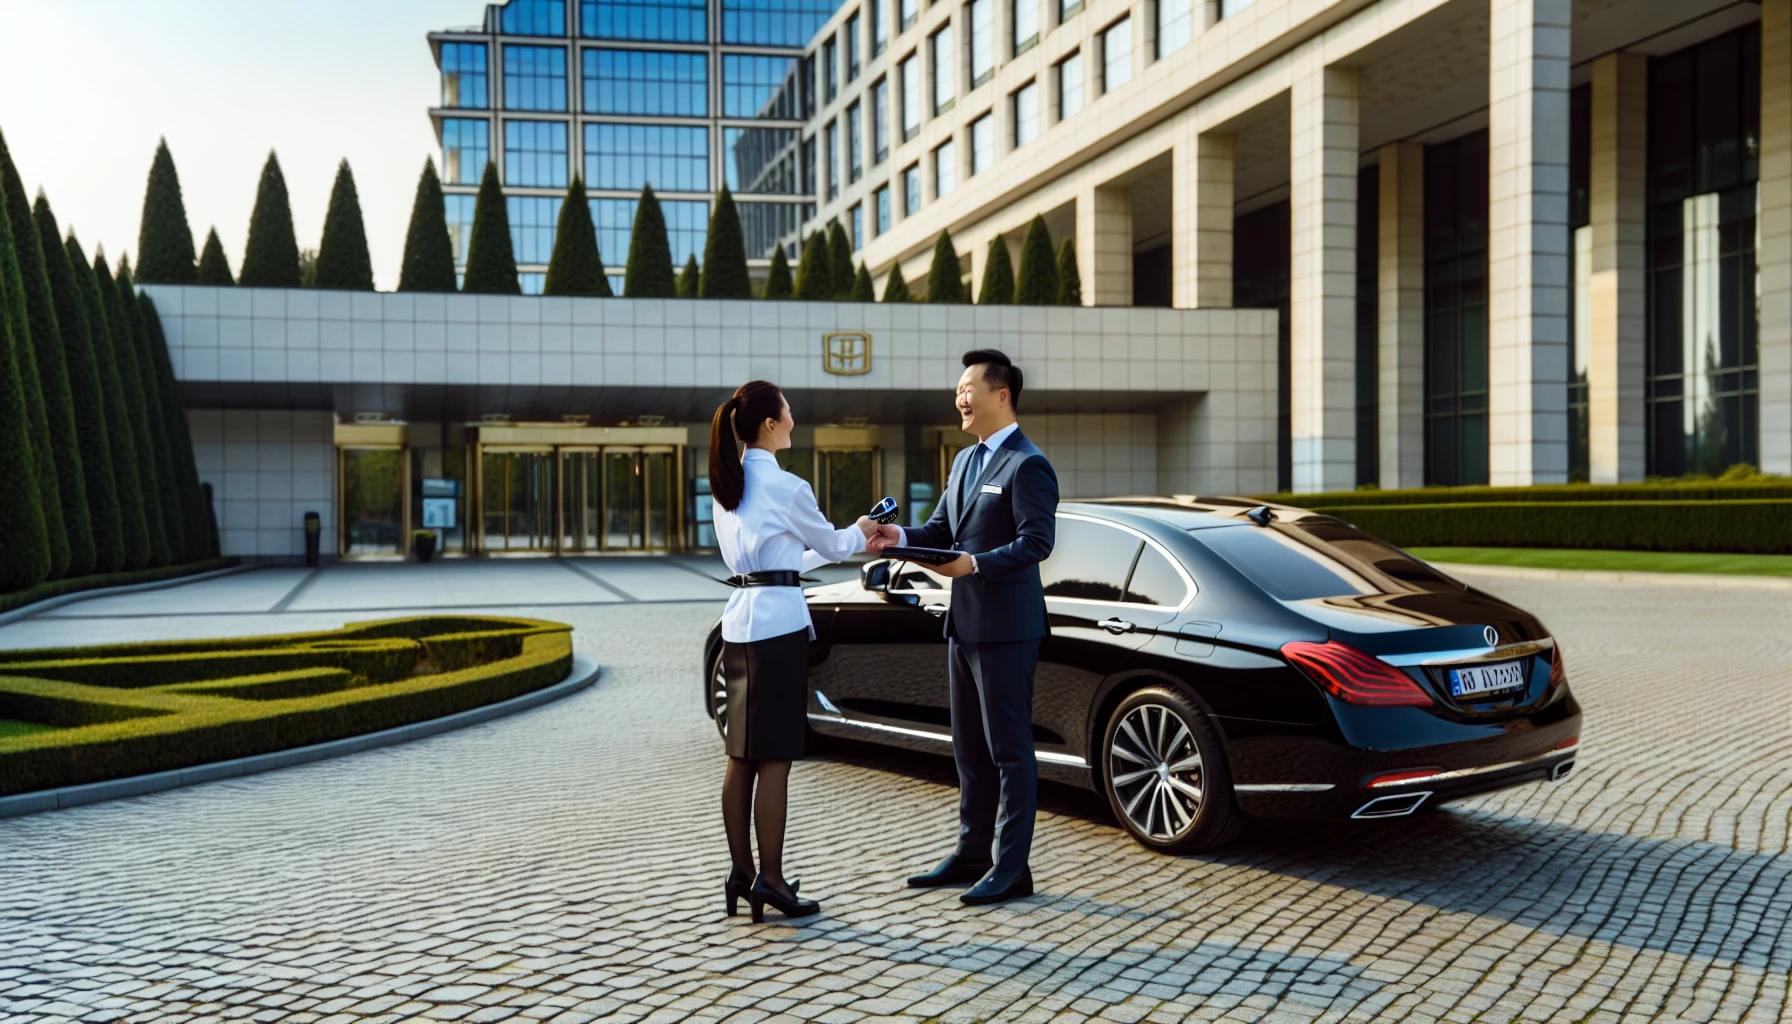 Hotel delivery service for rental cars